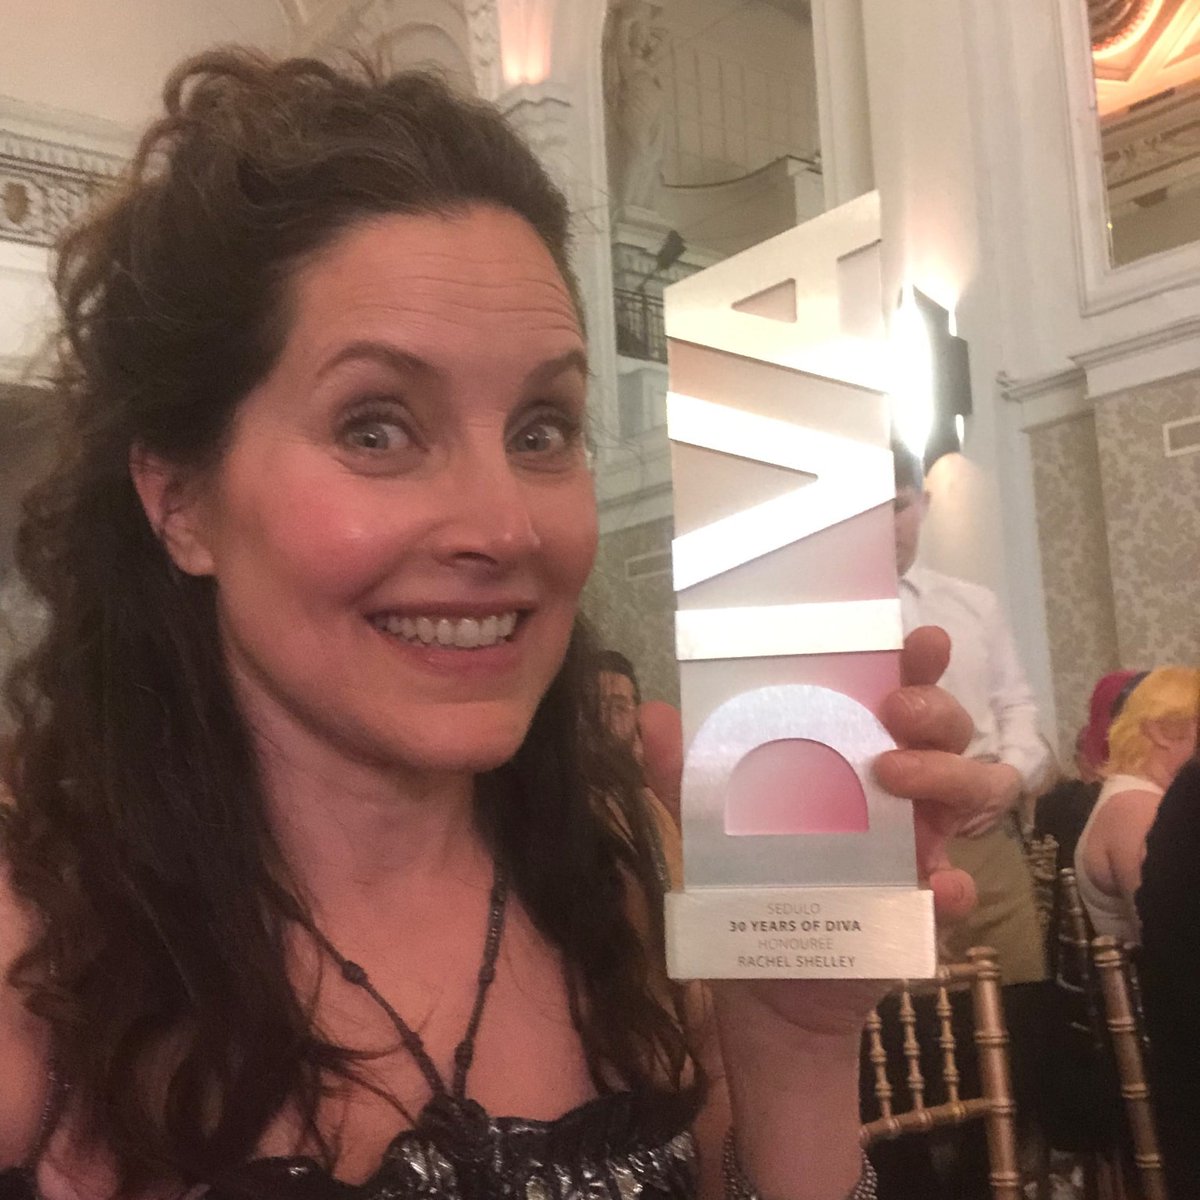 @RachelShelley, You really deserve this recognition! Congratulations! Thank You for so much! I love You! ❤️ #DIVAAwards